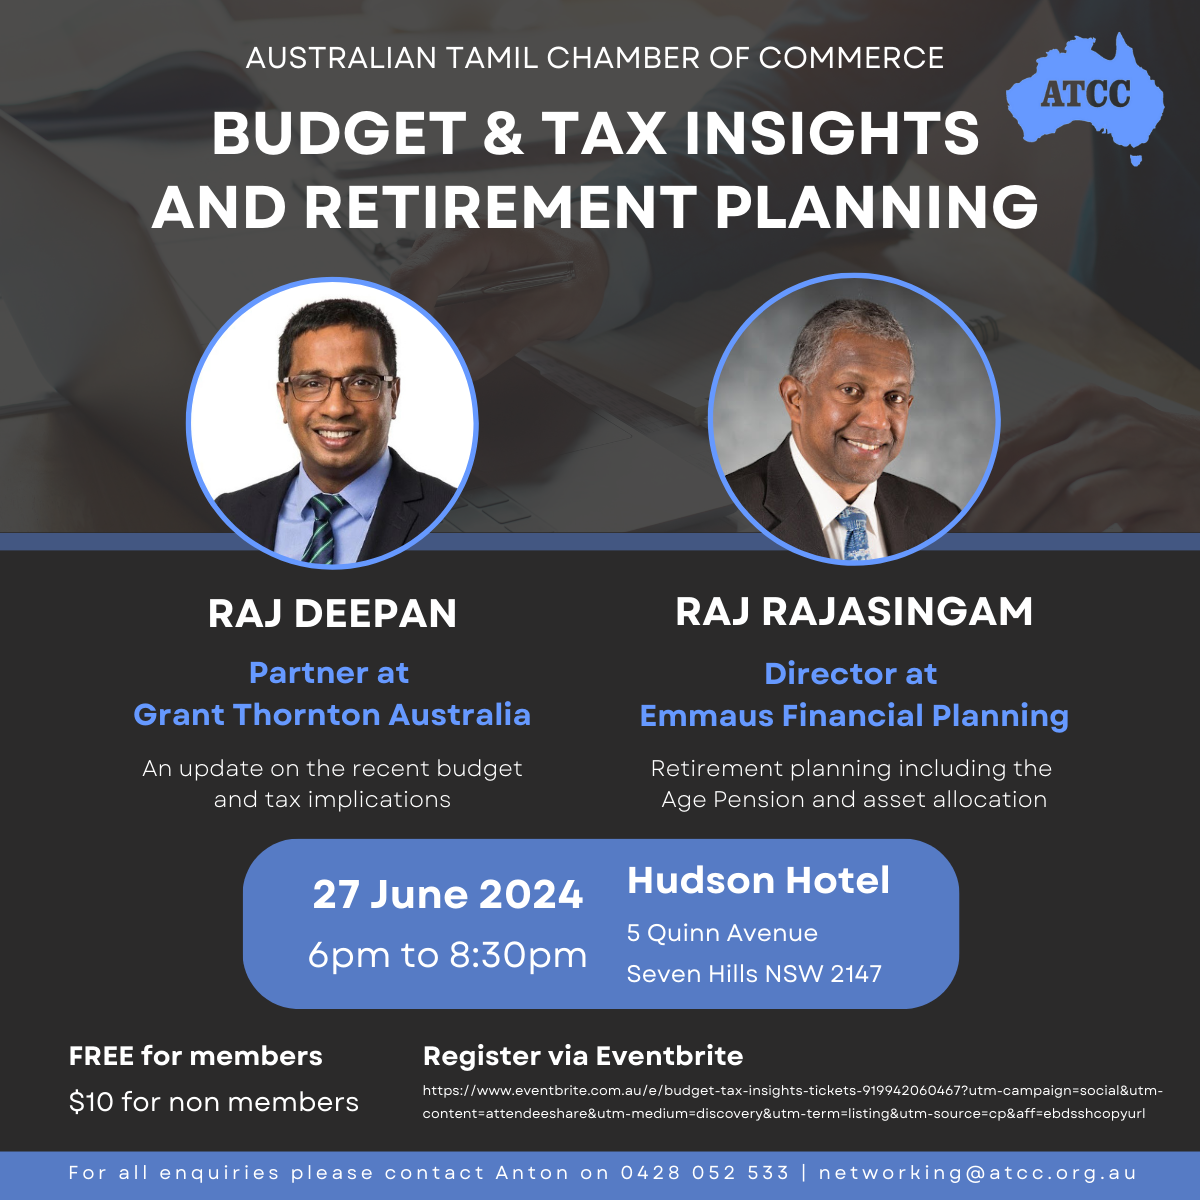 BUDGET & TAX INSIGHTS AND RETIREMENT PLANNING
